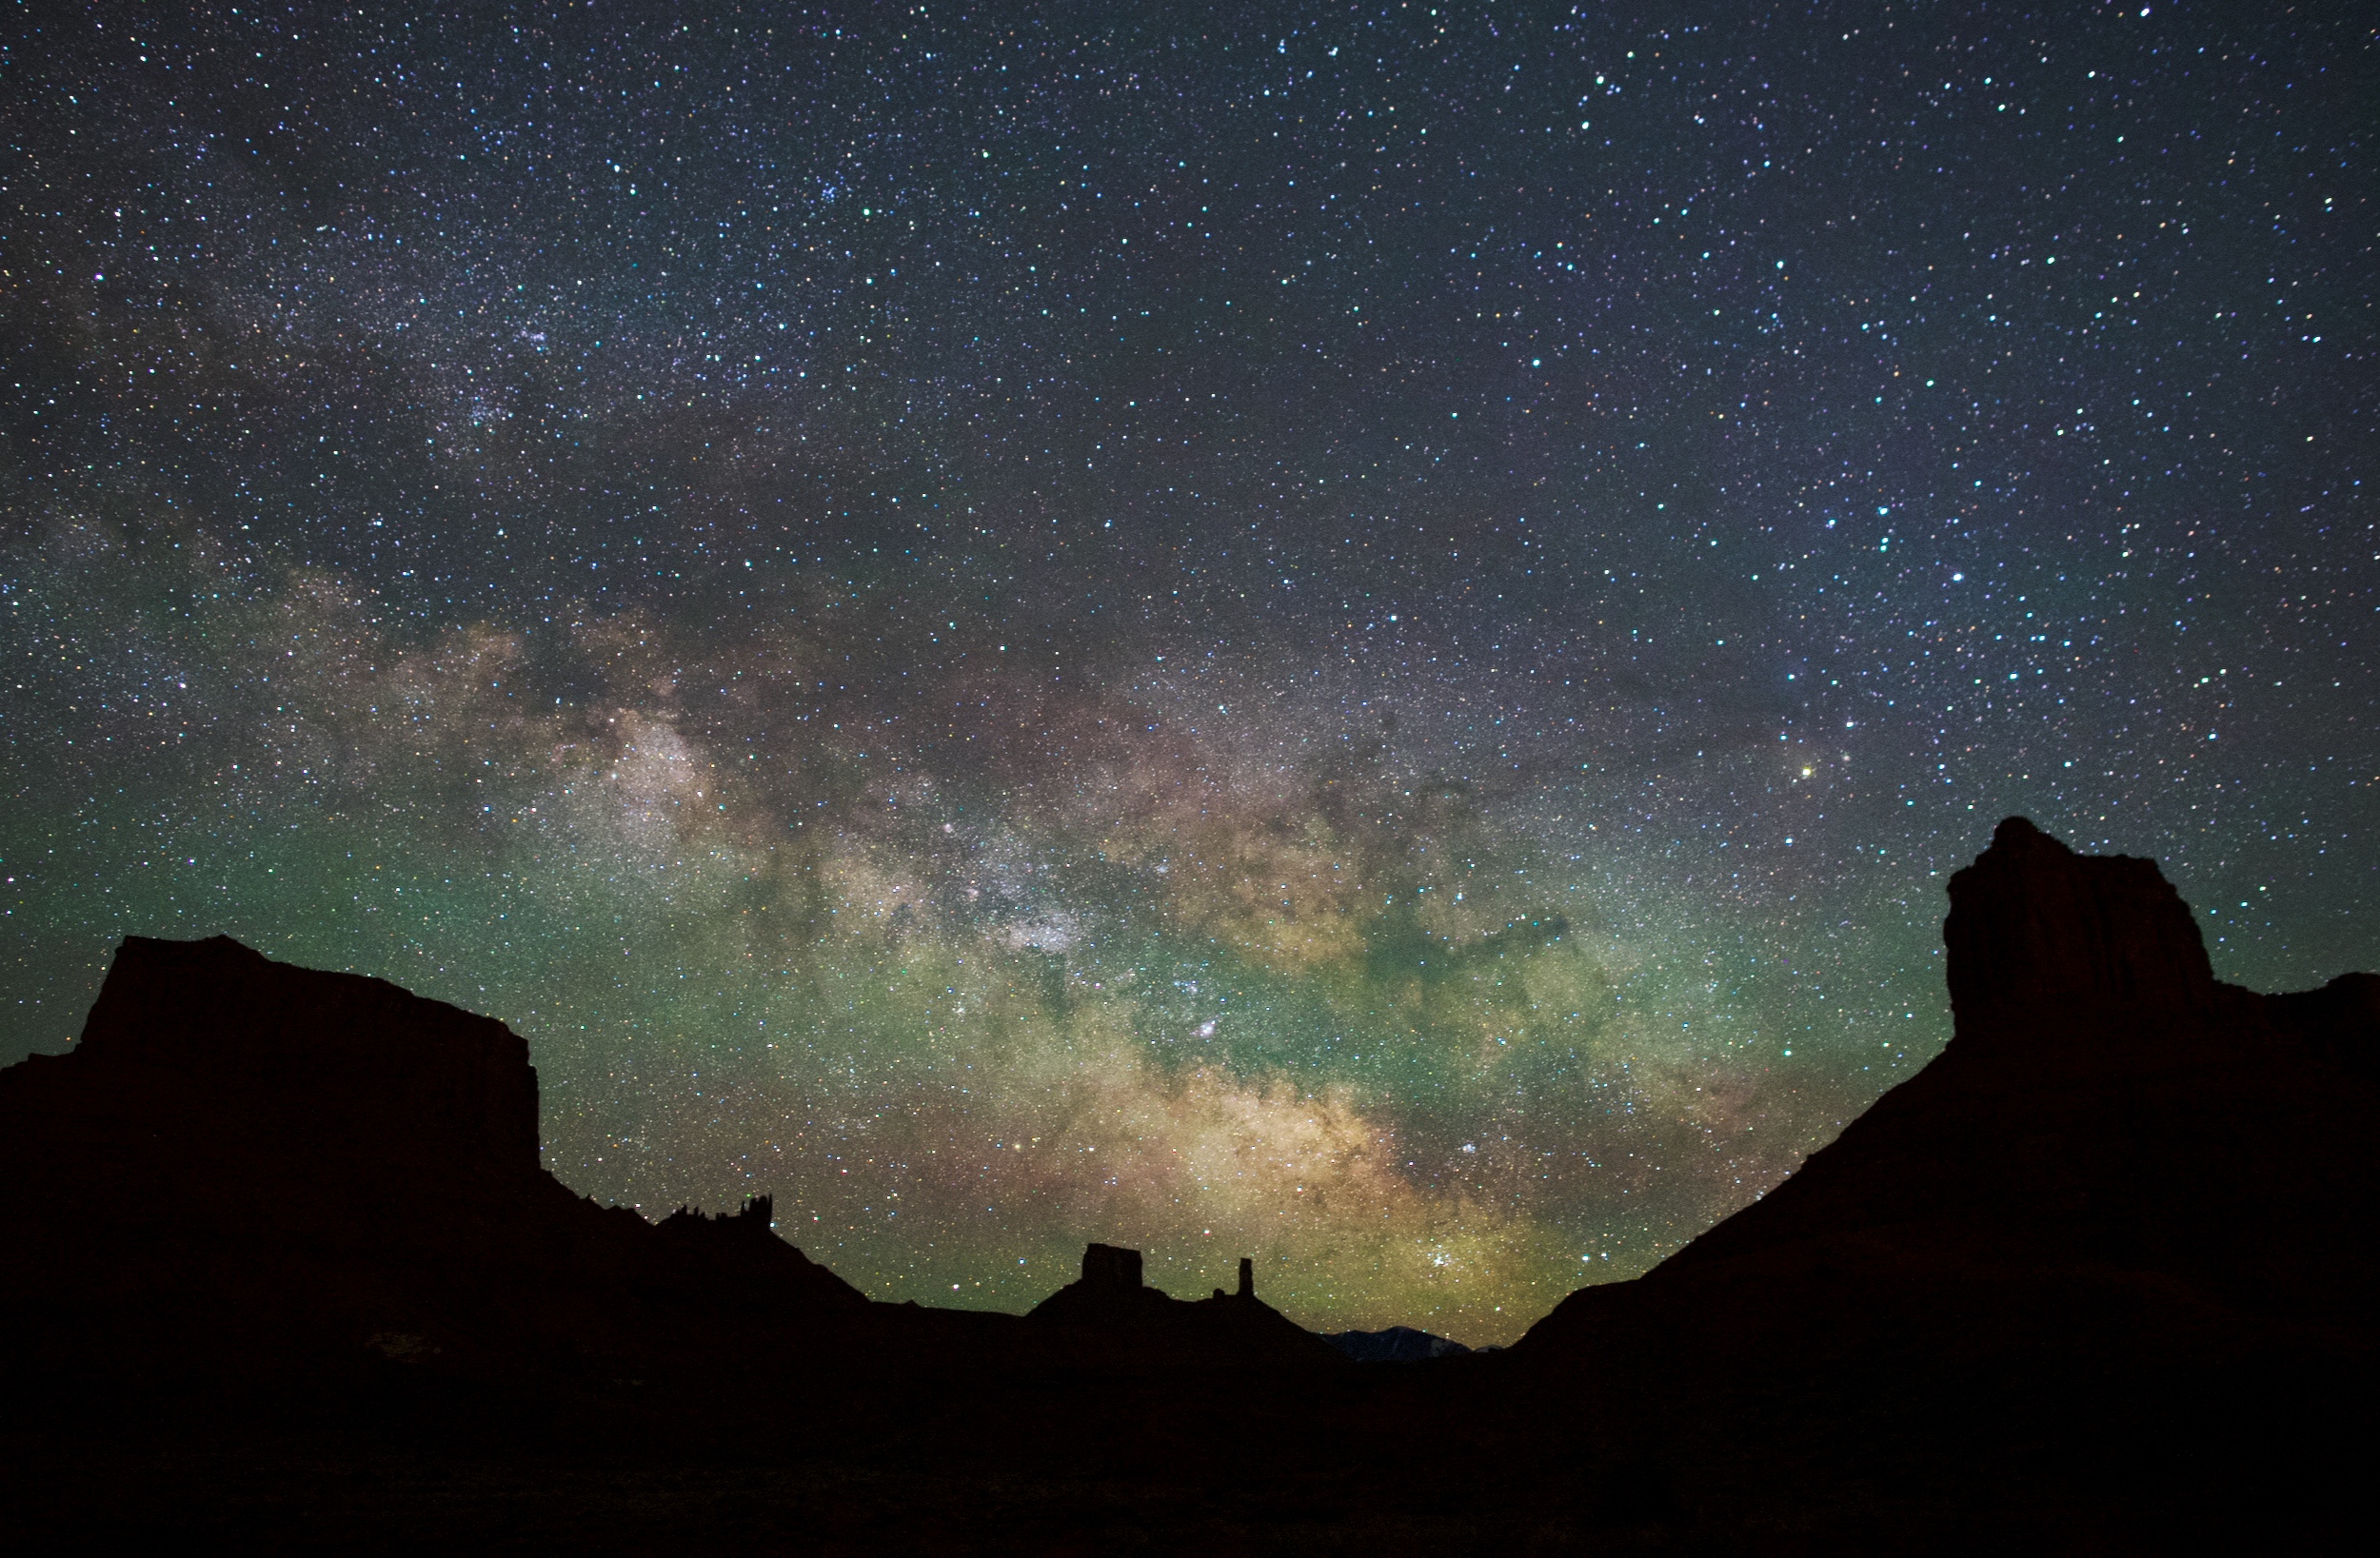 a dark horizon at night, with huge slihouettes of sandstone mesas. the bright Milky Way arches across the sky and bands green glow pass in front.